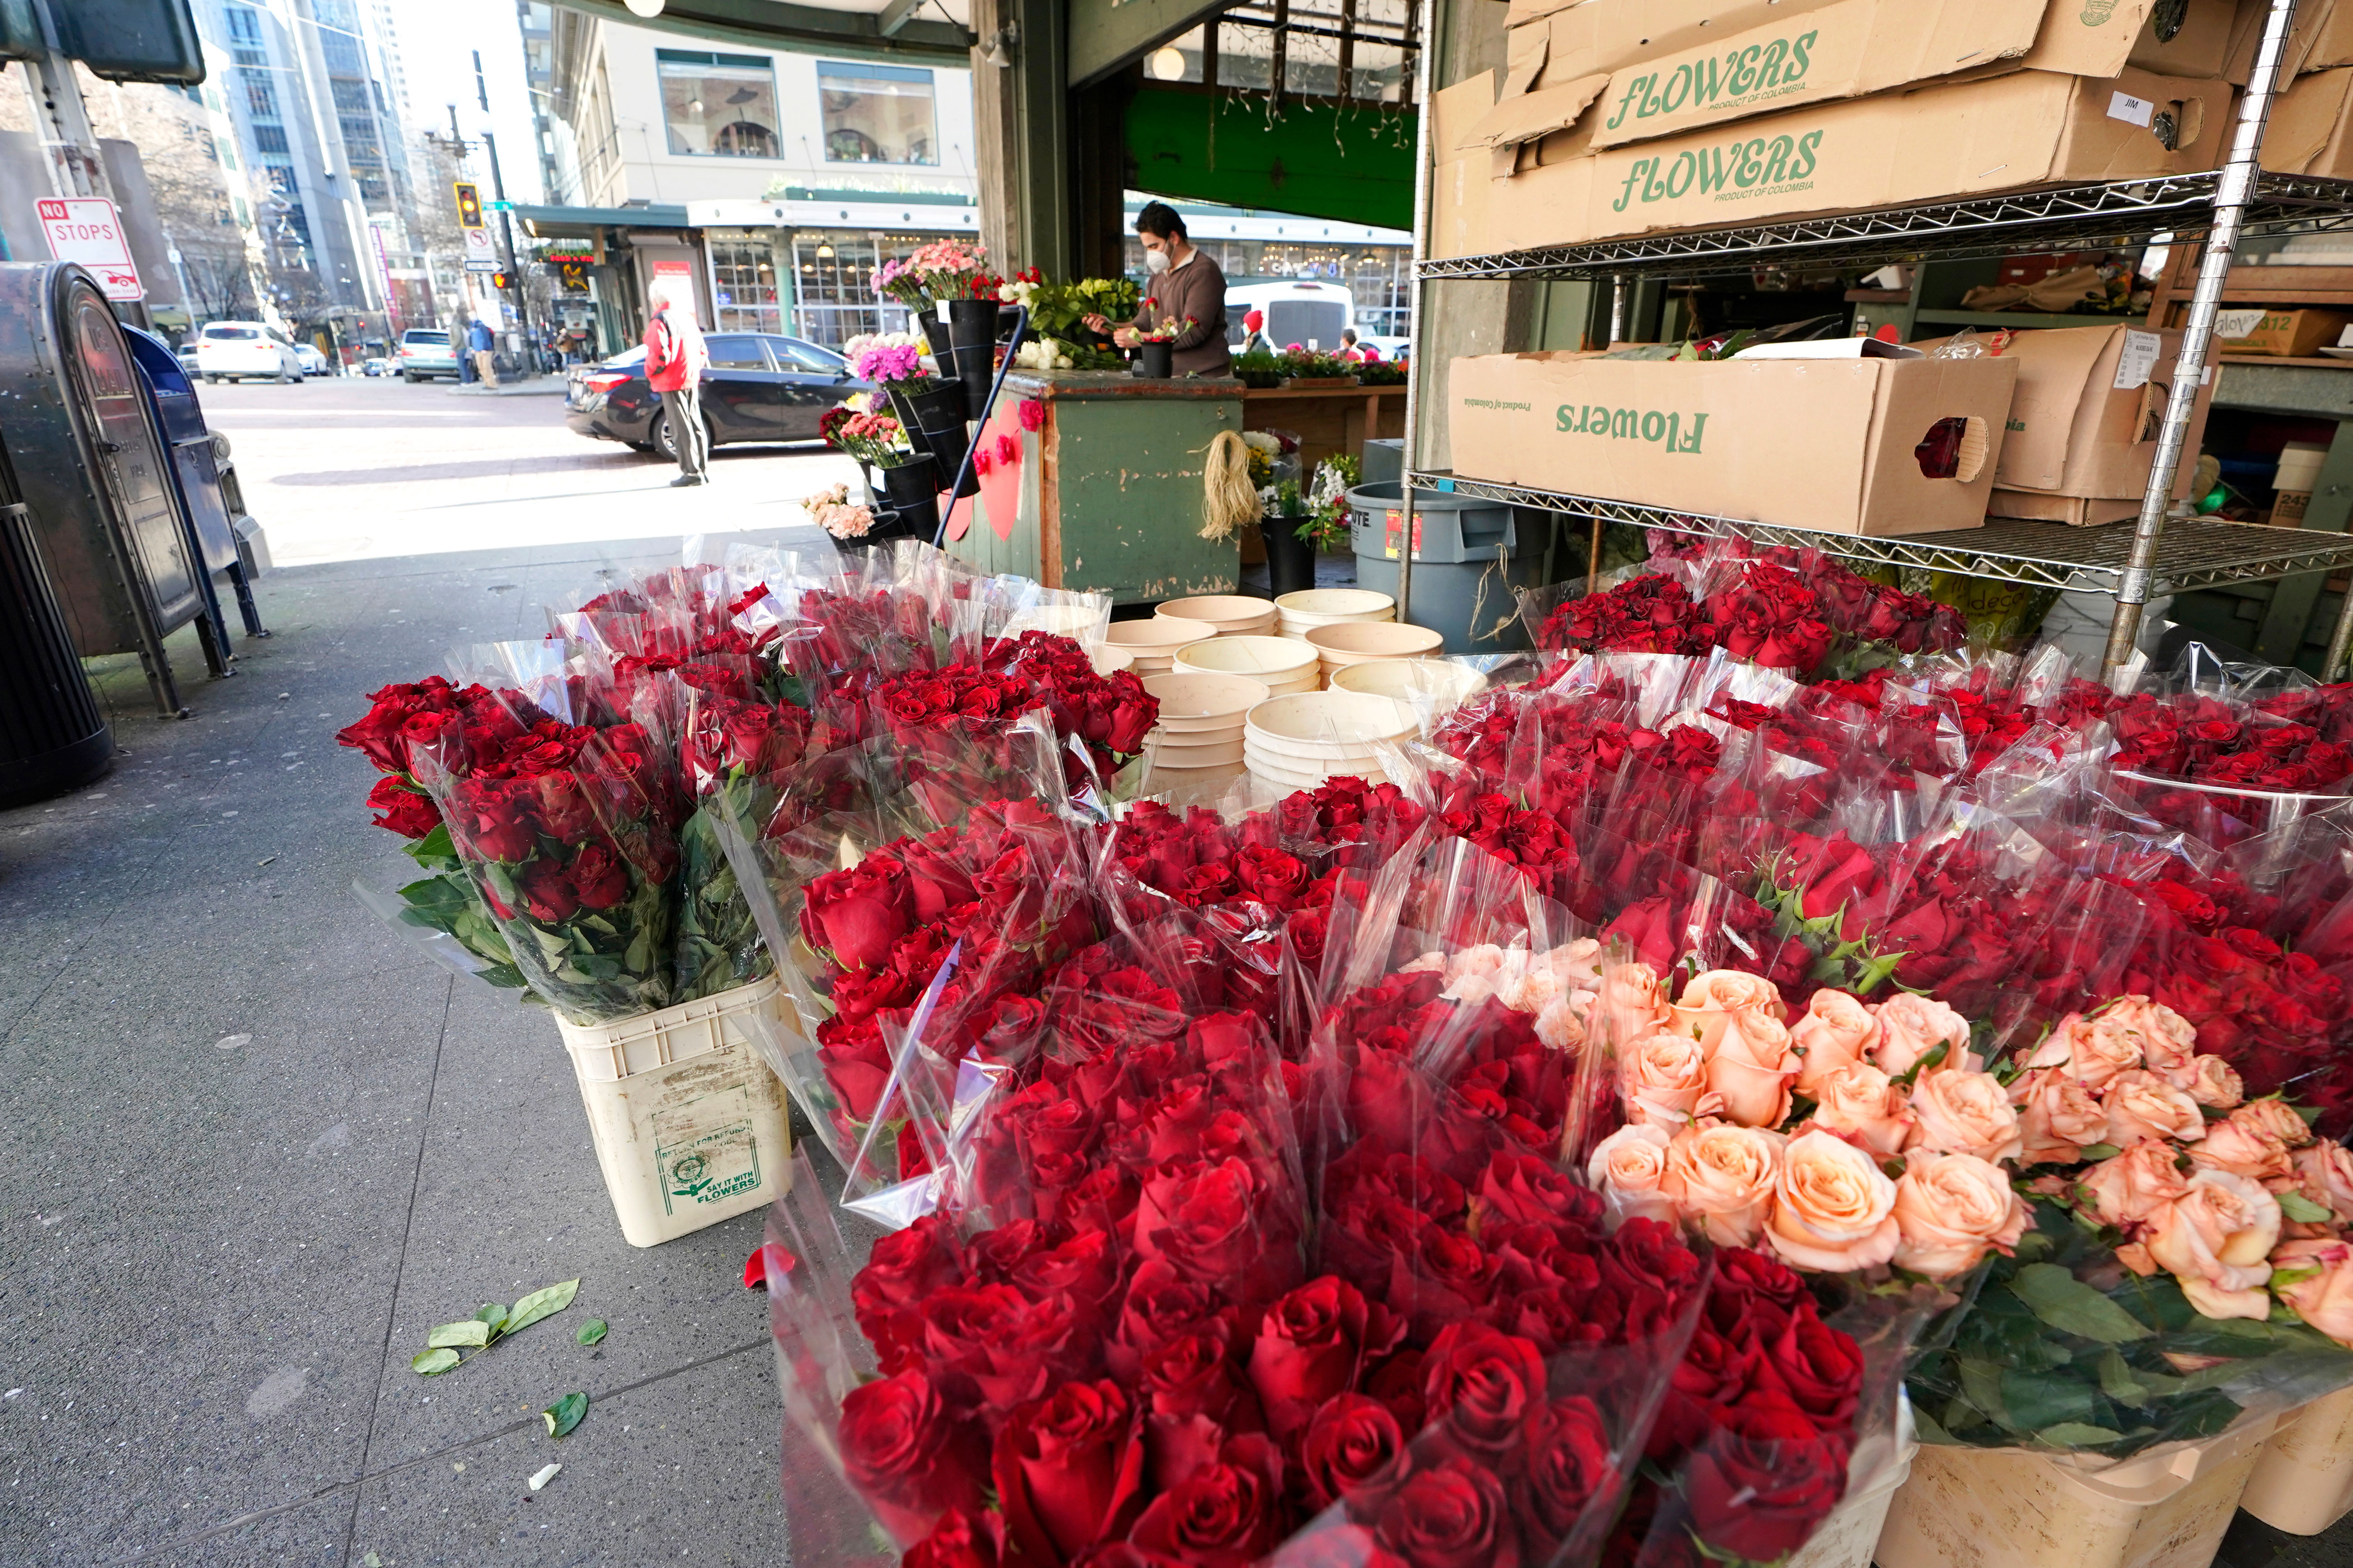 Pike Place Flowers in Seattle on February 9. Workers at the shop are preparing for Valentine's Day.